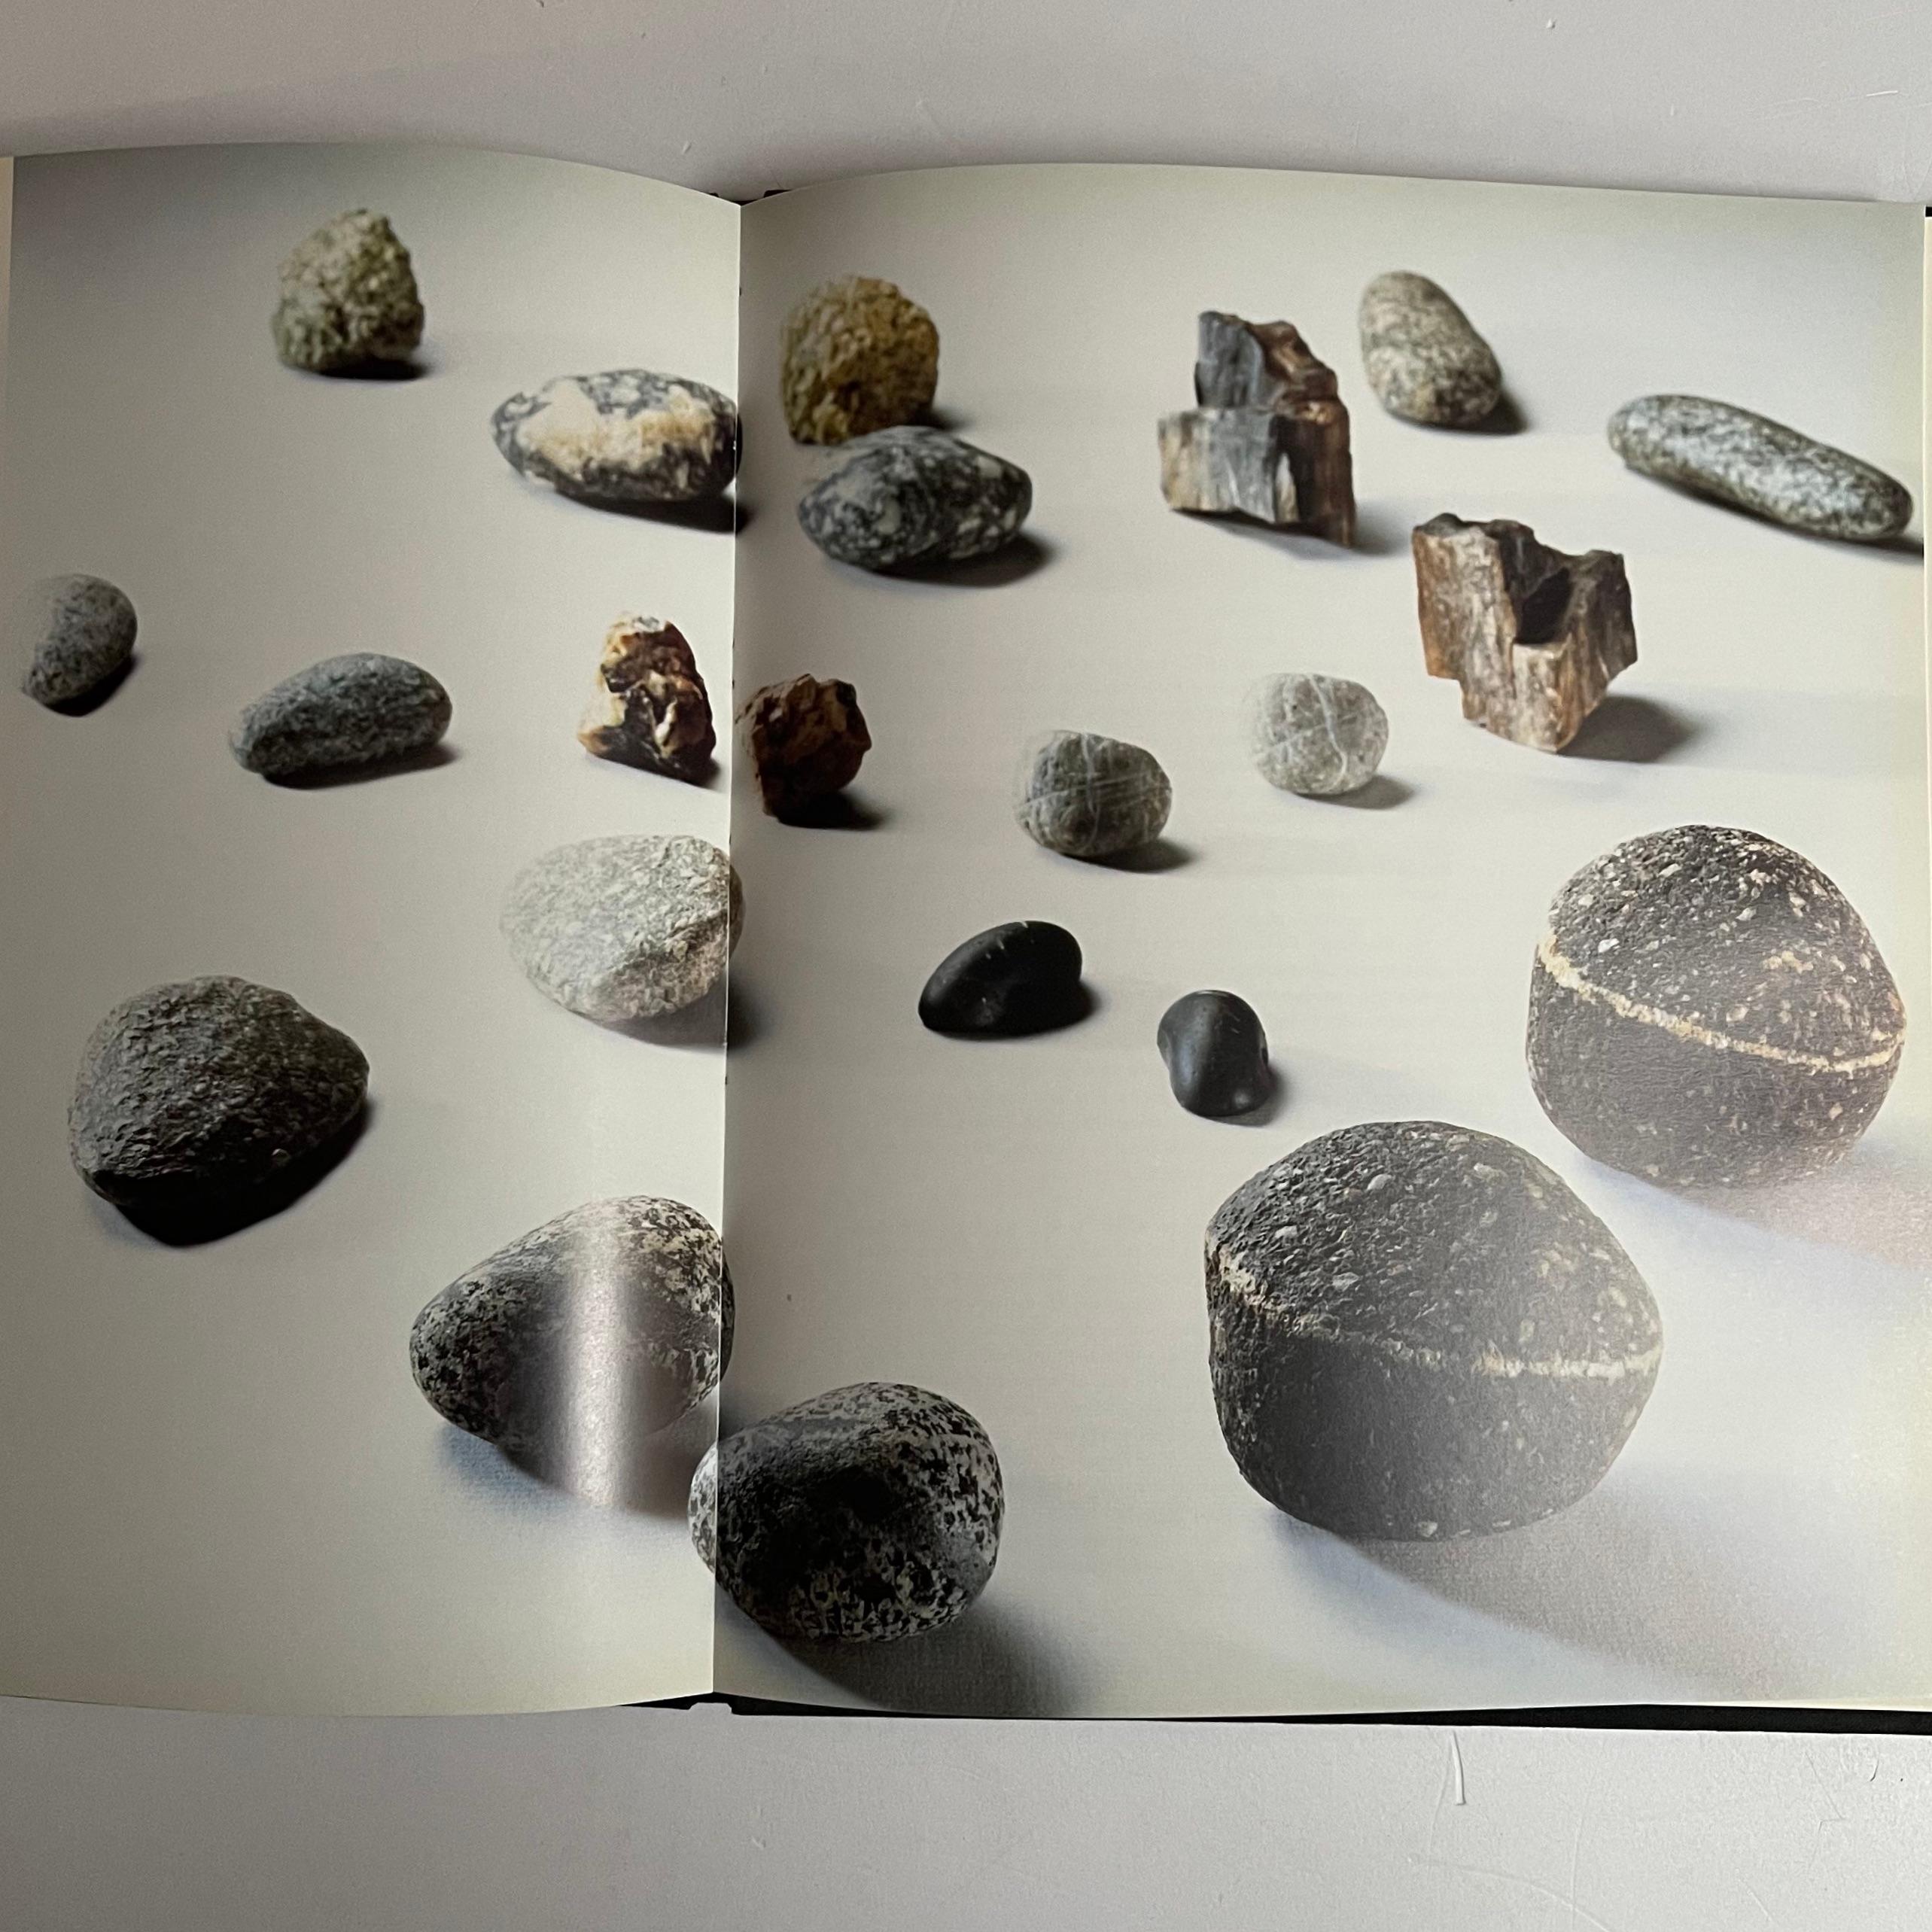 Published by The Institute Contemporary Arts, London, 1996, 1st editionPublished in celebration of Vija Celmins first Europen retrospective at the ICA London. Even thirty years after her debut show in Los Angeles when this exhibition was held at the